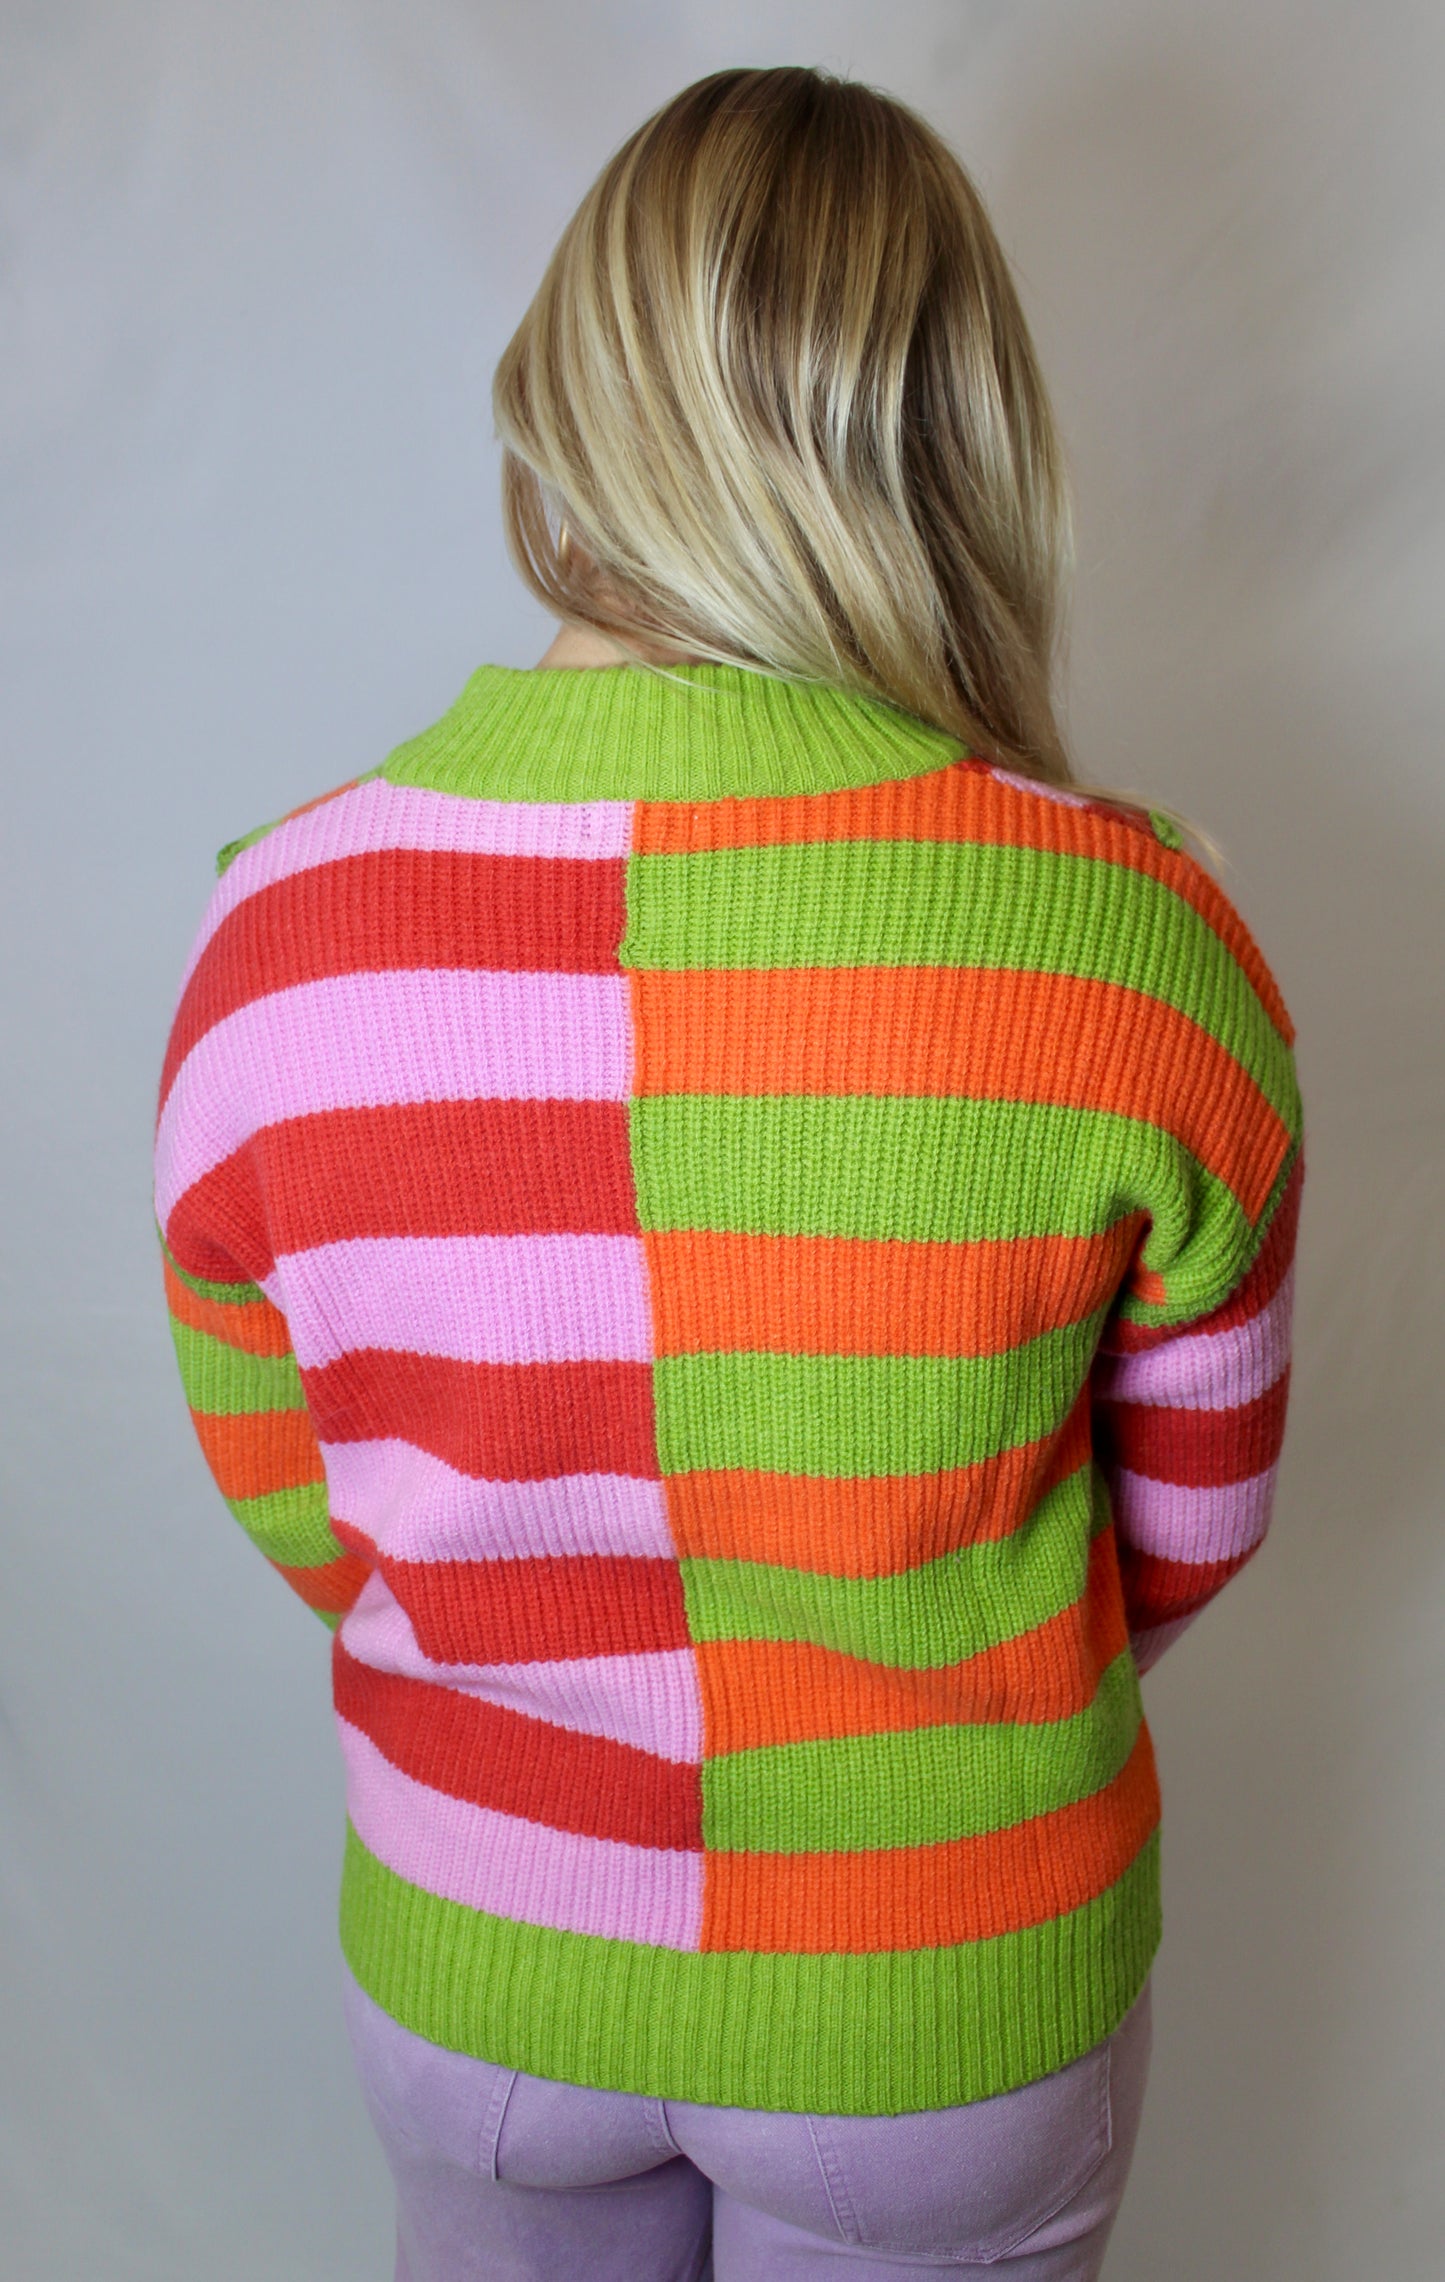 Sour Skittles Striped Sweater